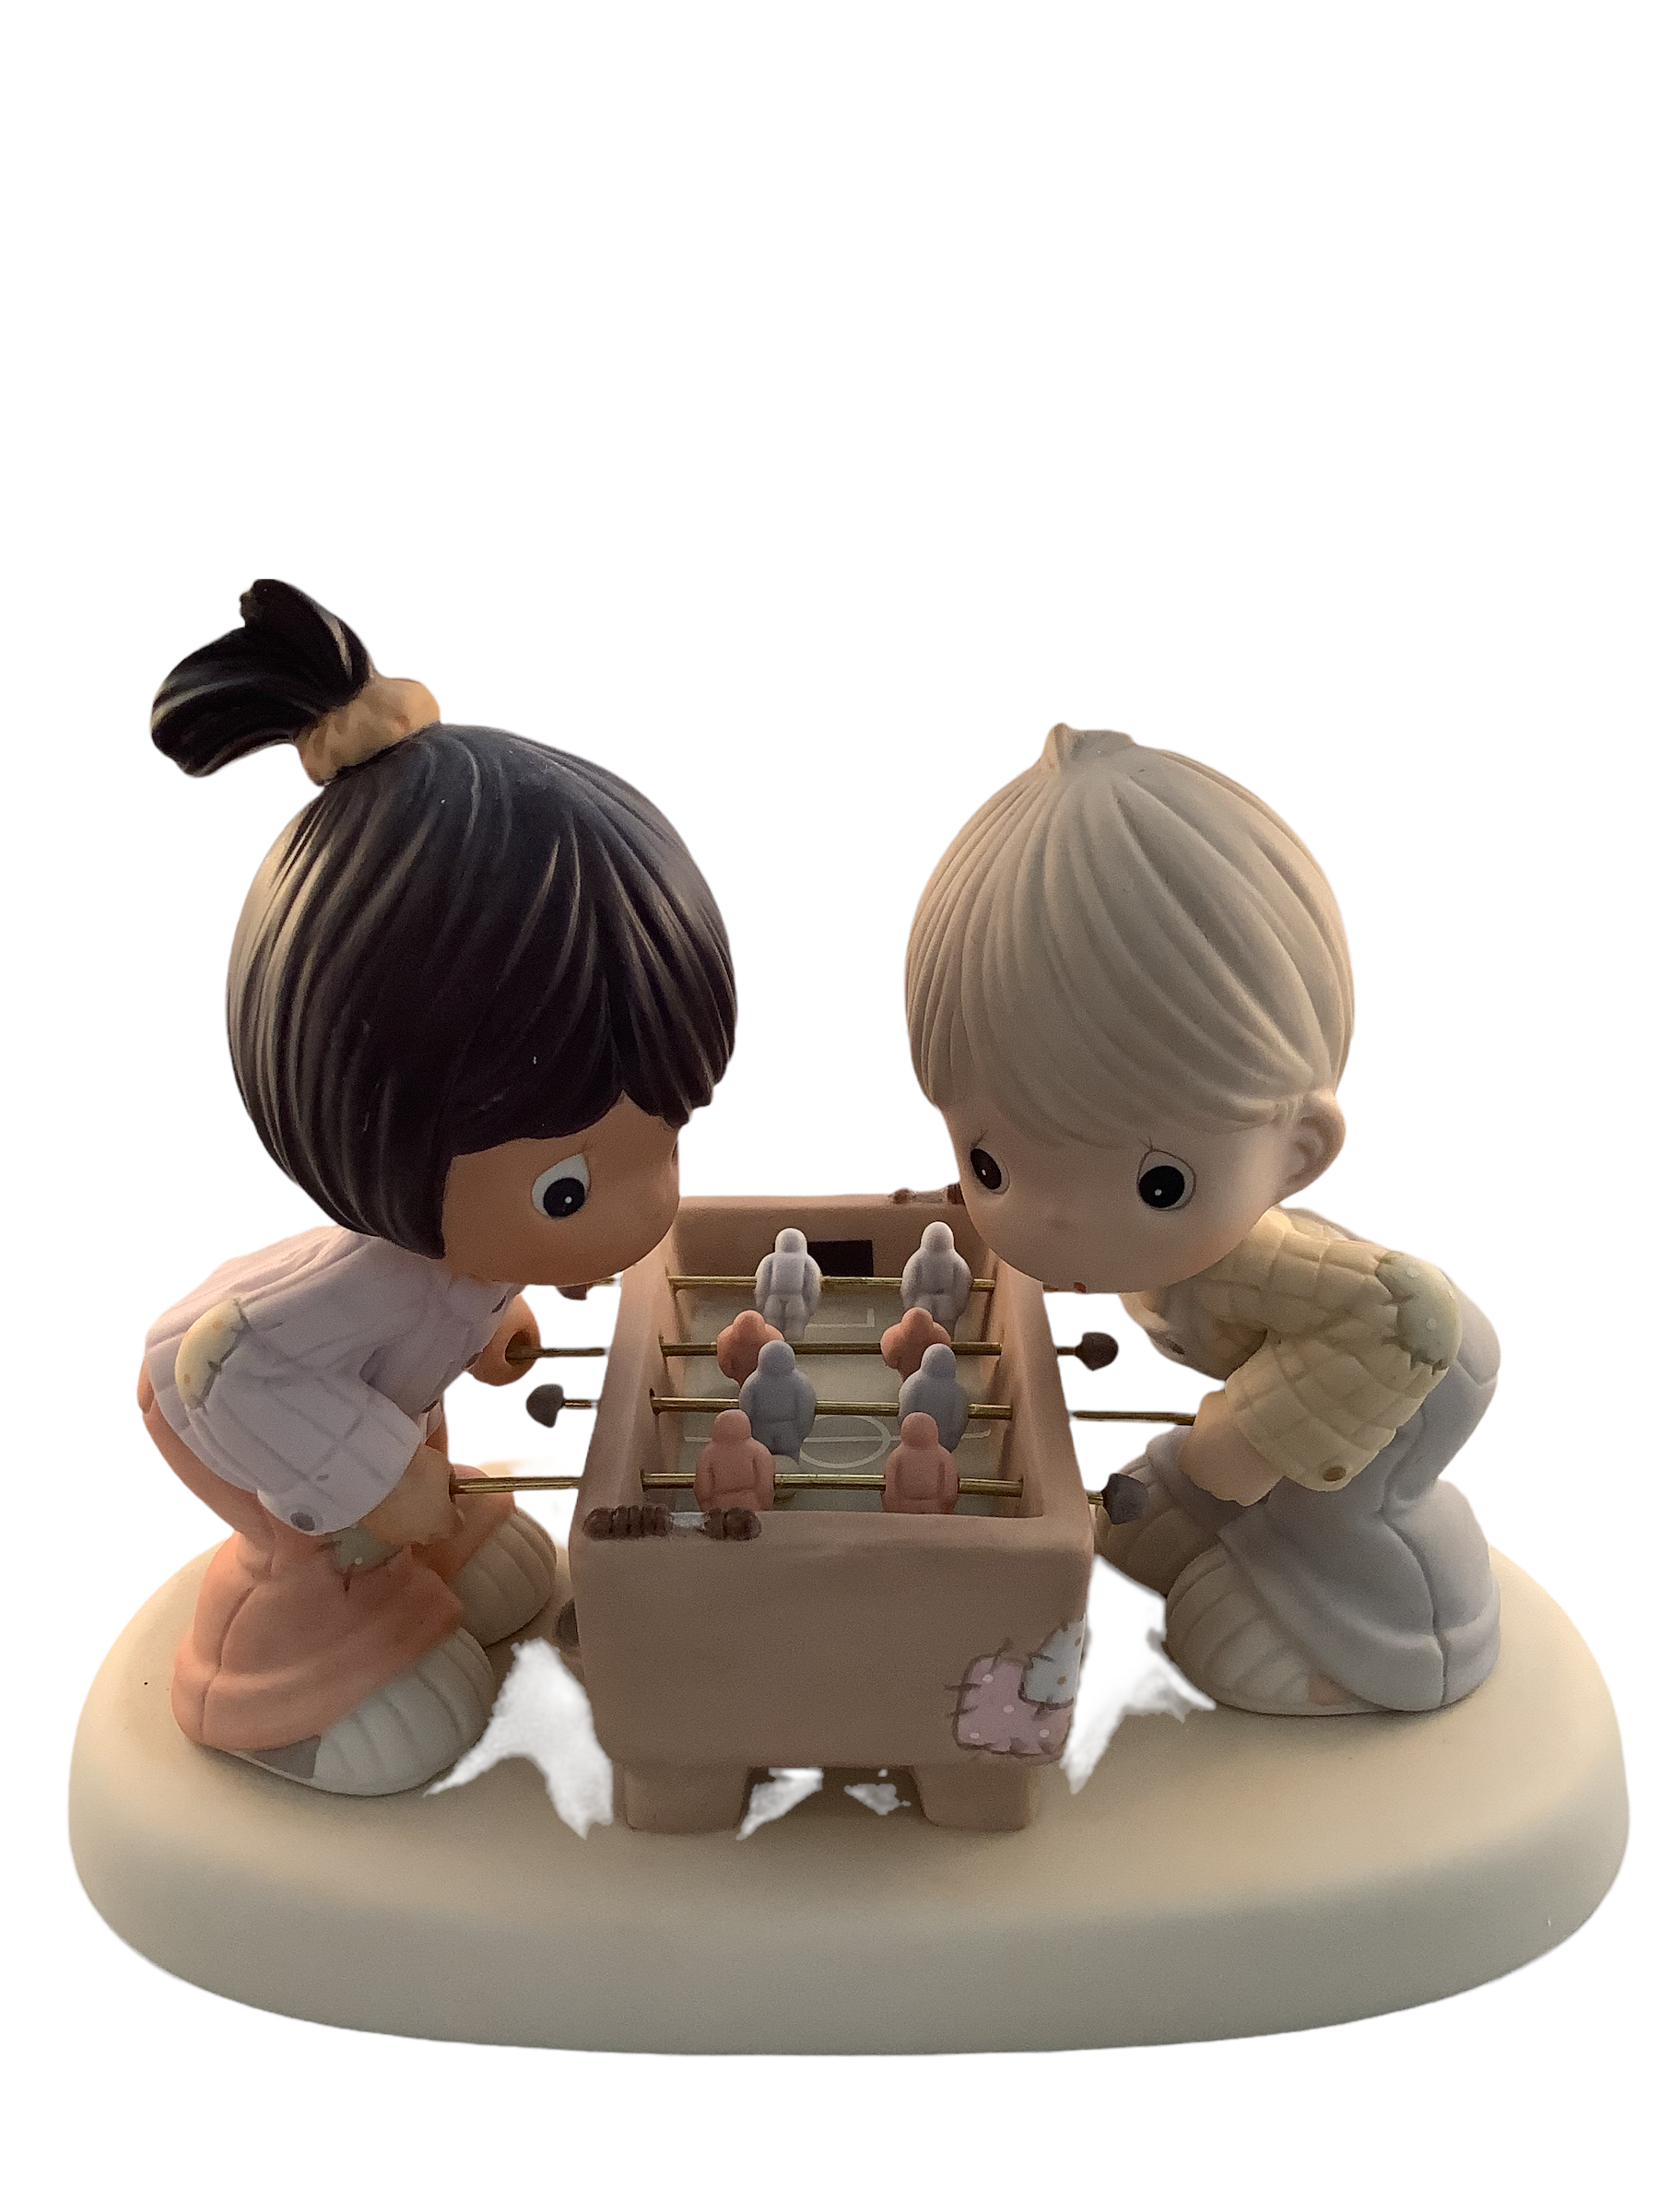 Sharing Fun And Games Together - Precious Moment Figurine